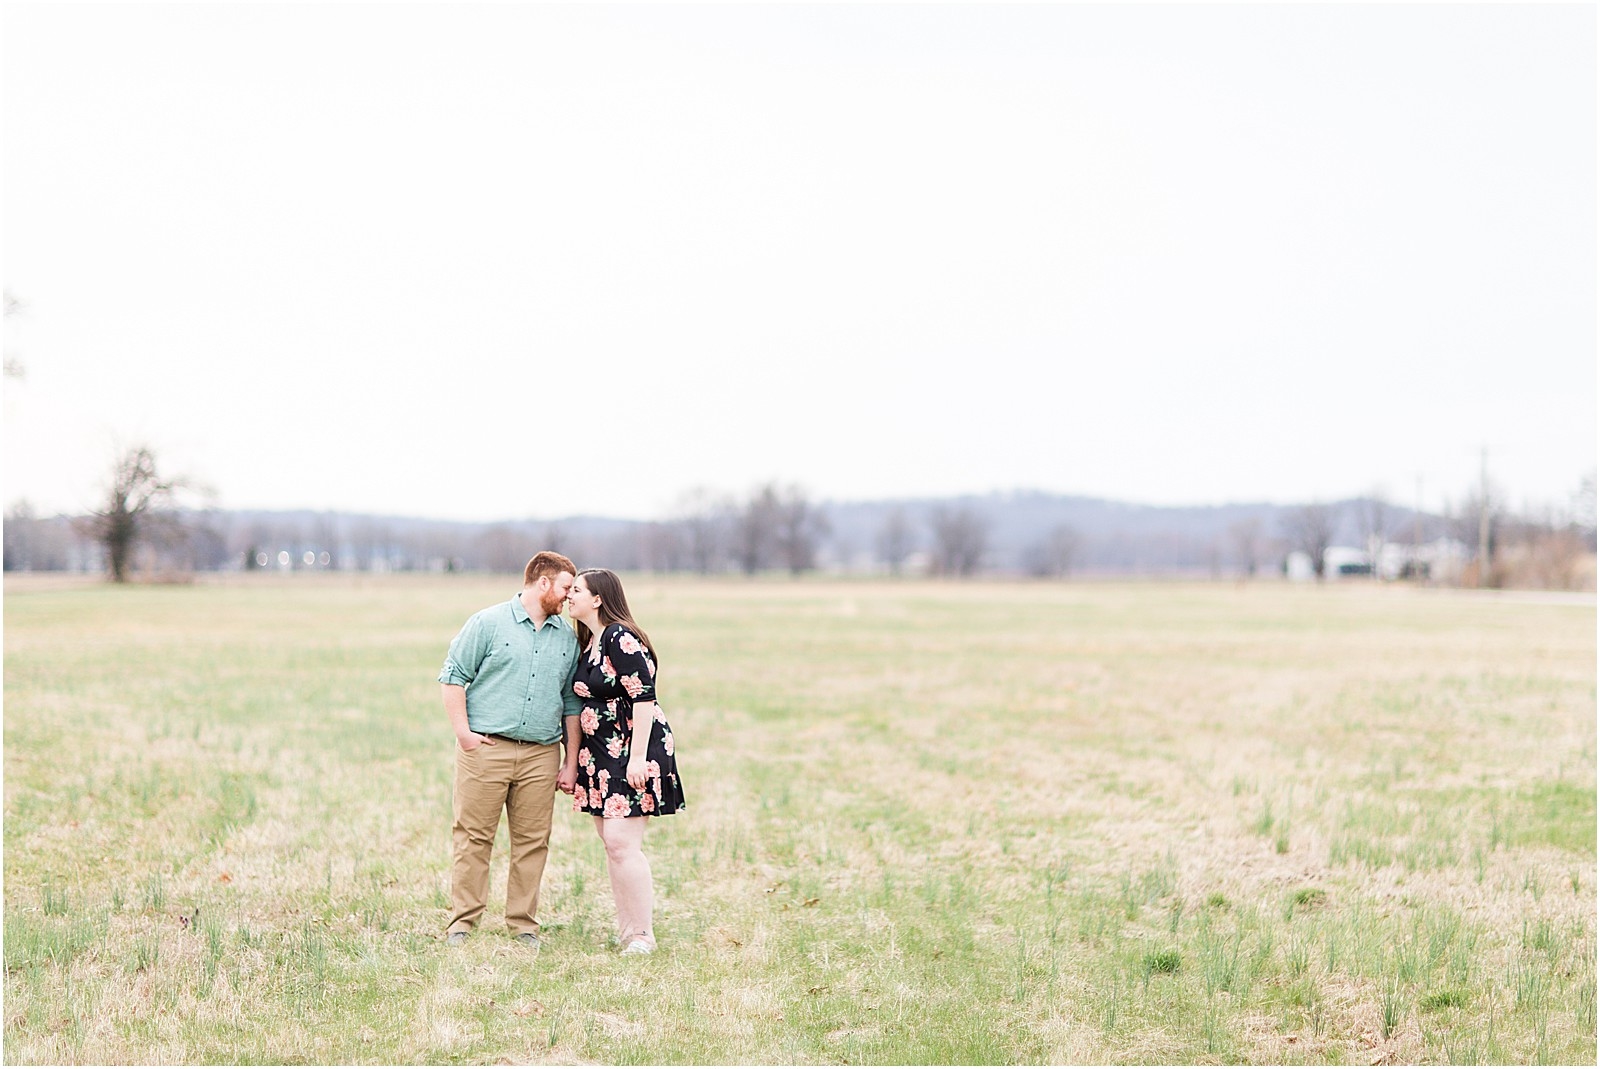 Jocelyn and Austin | Rockport Indiana Engament Session016.jpg